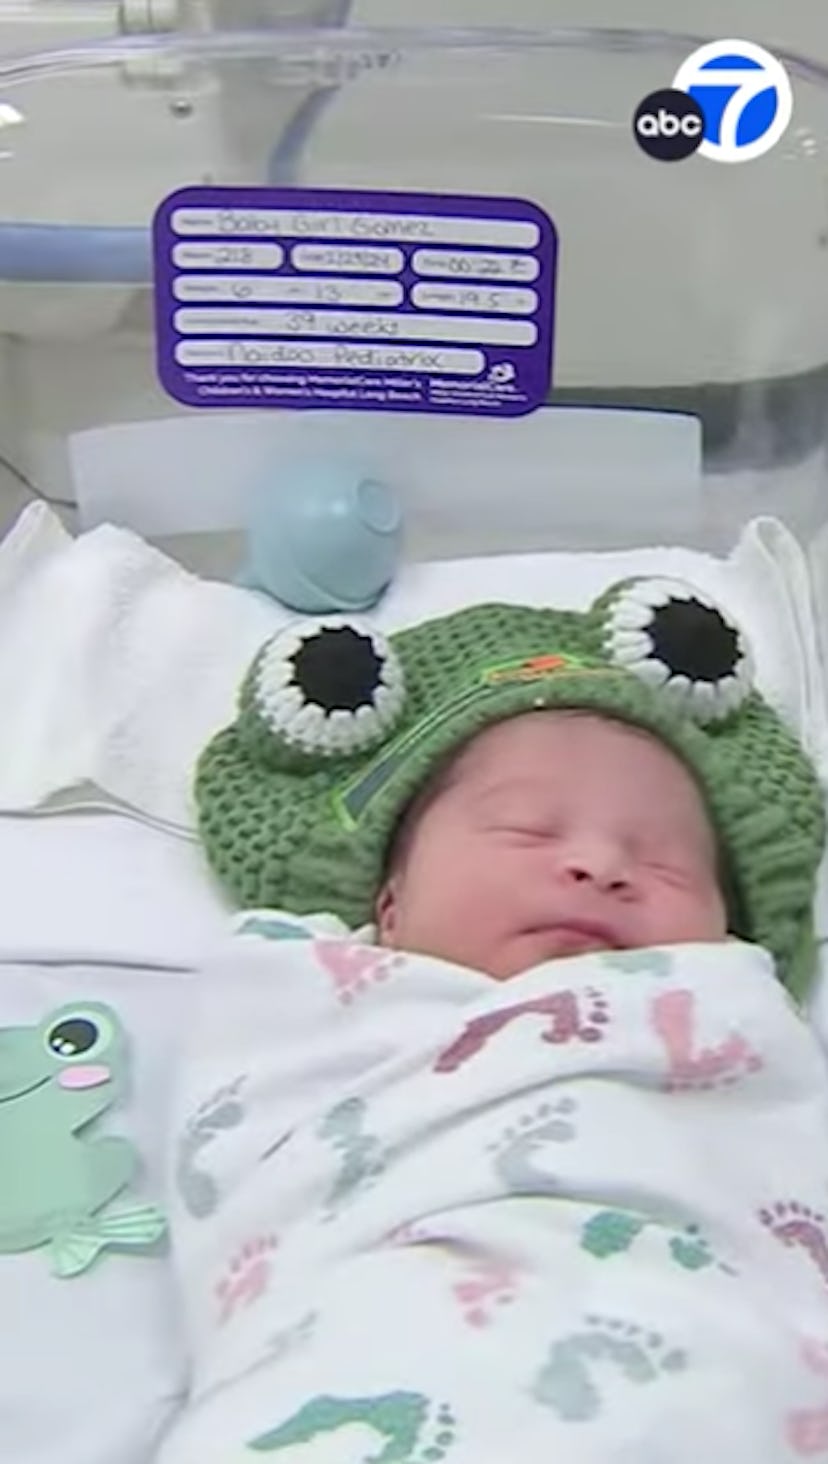 Baby Girl Gomez, born on Leap Day wearing a frog hat.